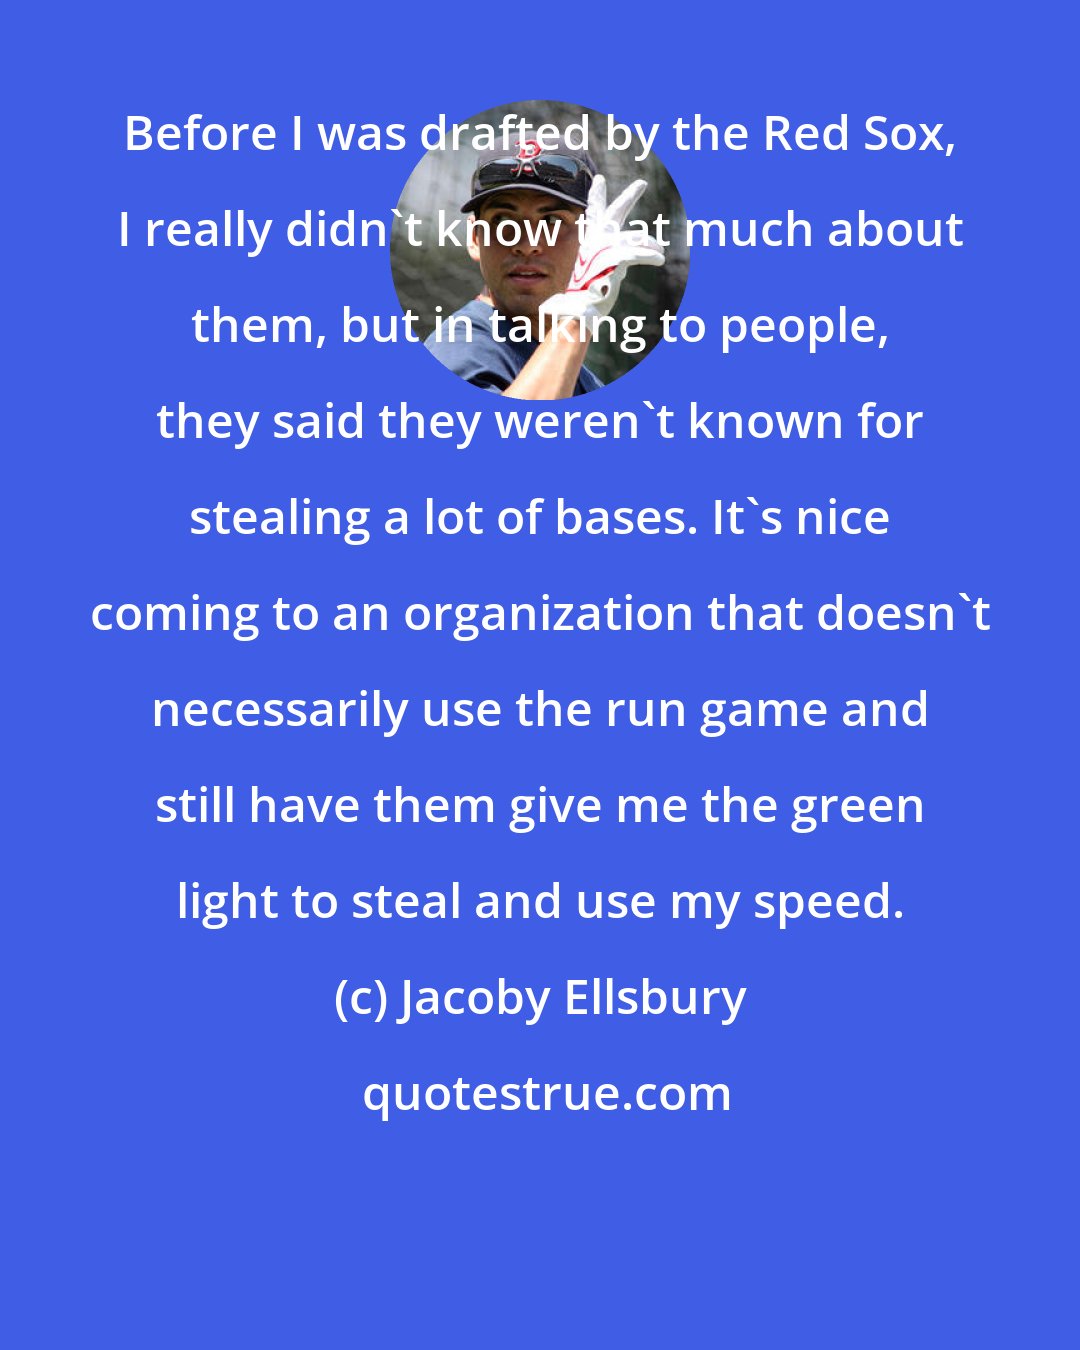 Jacoby Ellsbury: Before I was drafted by the Red Sox, I really didn't know that much about them, but in talking to people, they said they weren't known for stealing a lot of bases. It's nice coming to an organization that doesn't necessarily use the run game and still have them give me the green light to steal and use my speed.